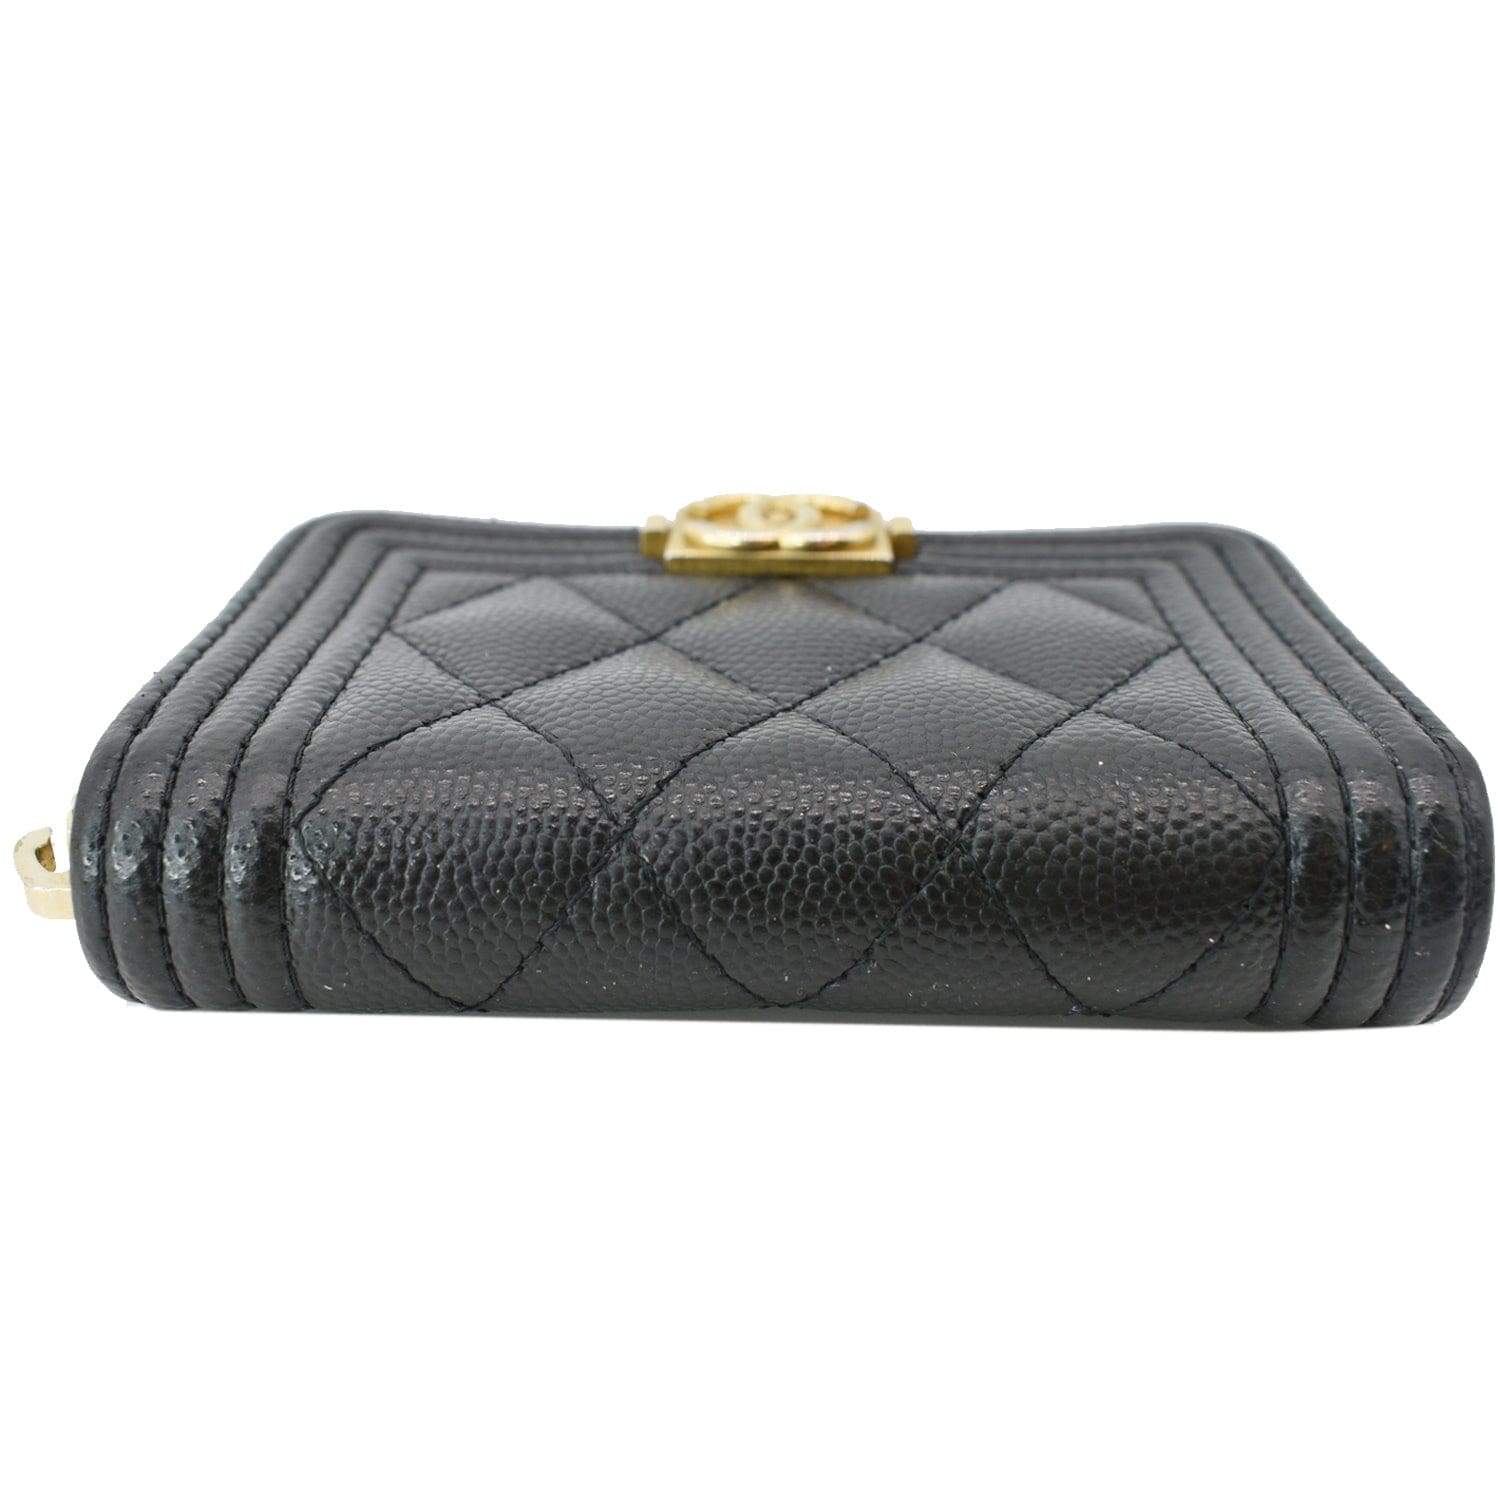 CHANEL Metallic Calfskin Quilted Small Boy Zip Around Wallet Charcoal |  FASHIONPHILE